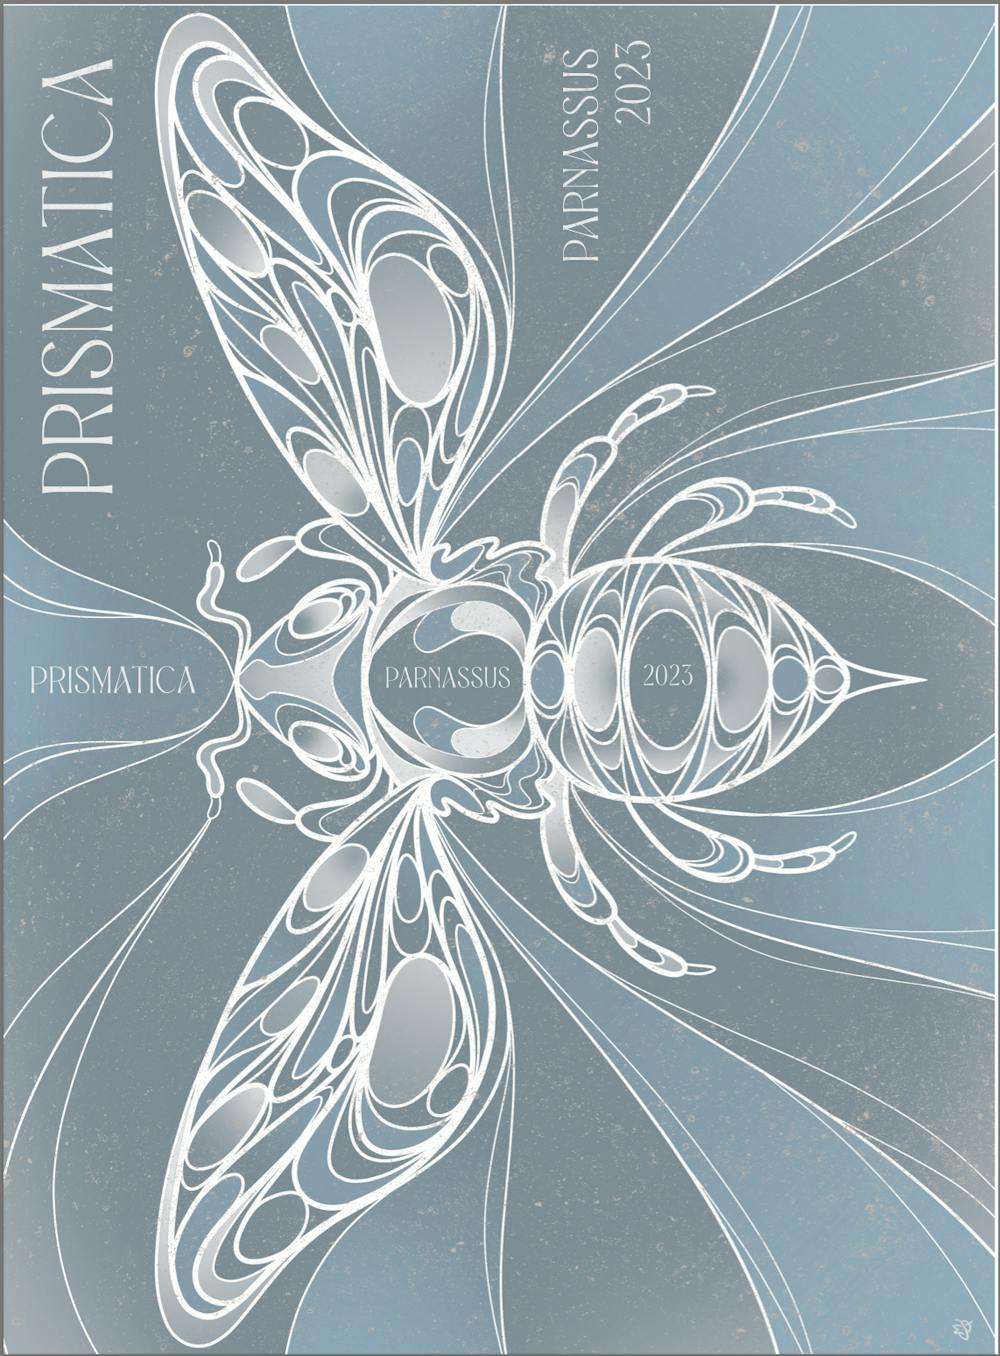 Parnassus releases new edition of literary journal, ‘Prismatica’